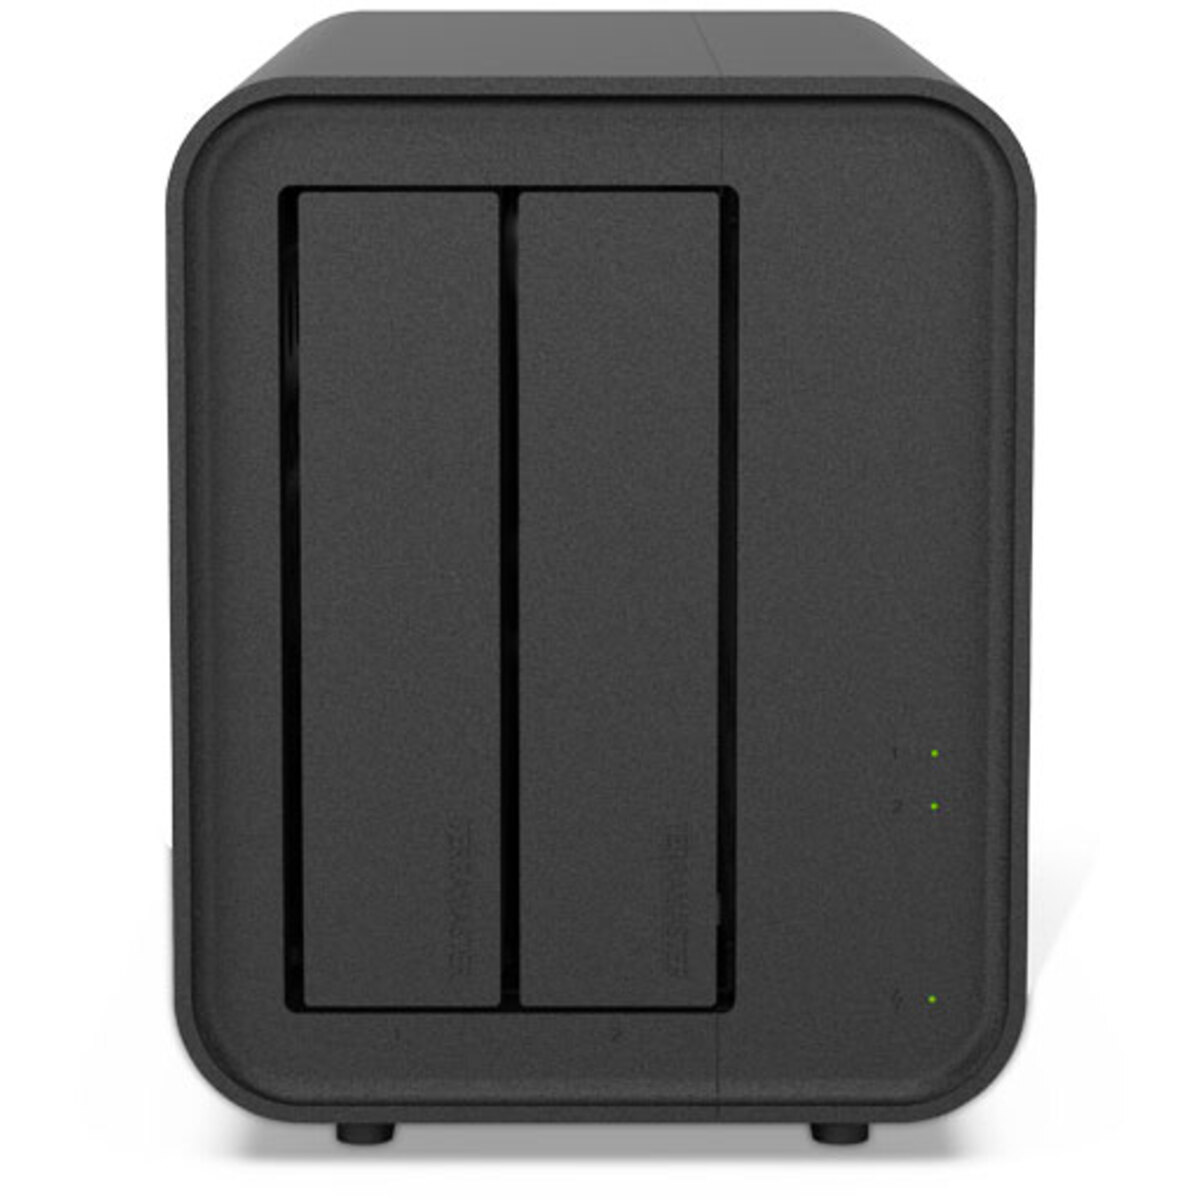 TerraMaster F2-424 16tb 2-Bay Desktop Multimedia / Power User / Business NAS - Network Attached Storage Device 2x8tb Seagate IronWolf Pro ST8000NT001 3.5 7200rpm SATA 6Gb/s HDD NAS Class Drives Installed - Burn-In Tested - ON SALE F2-424